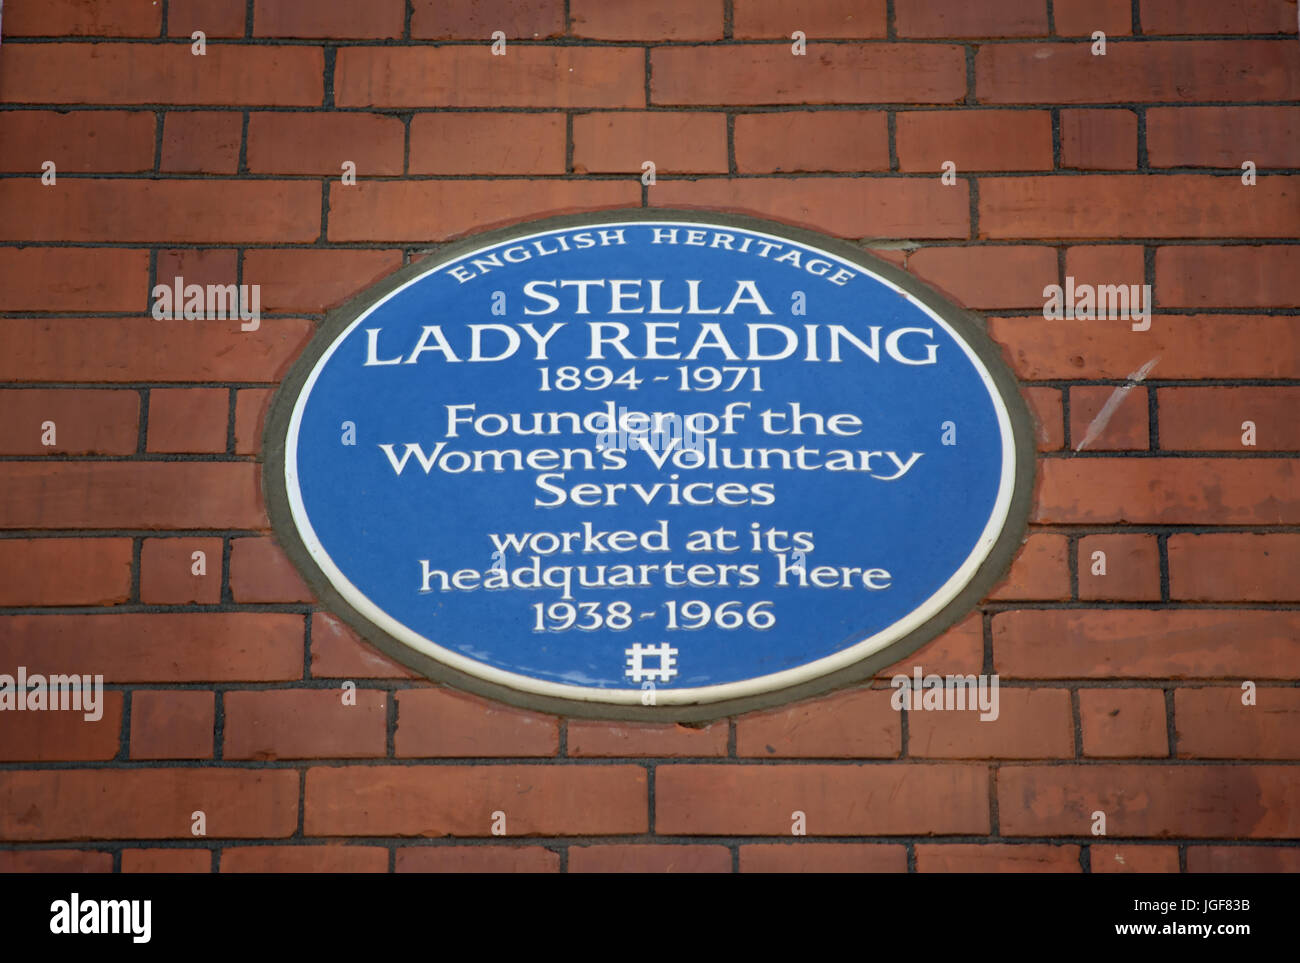 english heritage blue plaque marking a workplace of stella lady reading, founder of the women's voluntary services, london, england Stock Photo